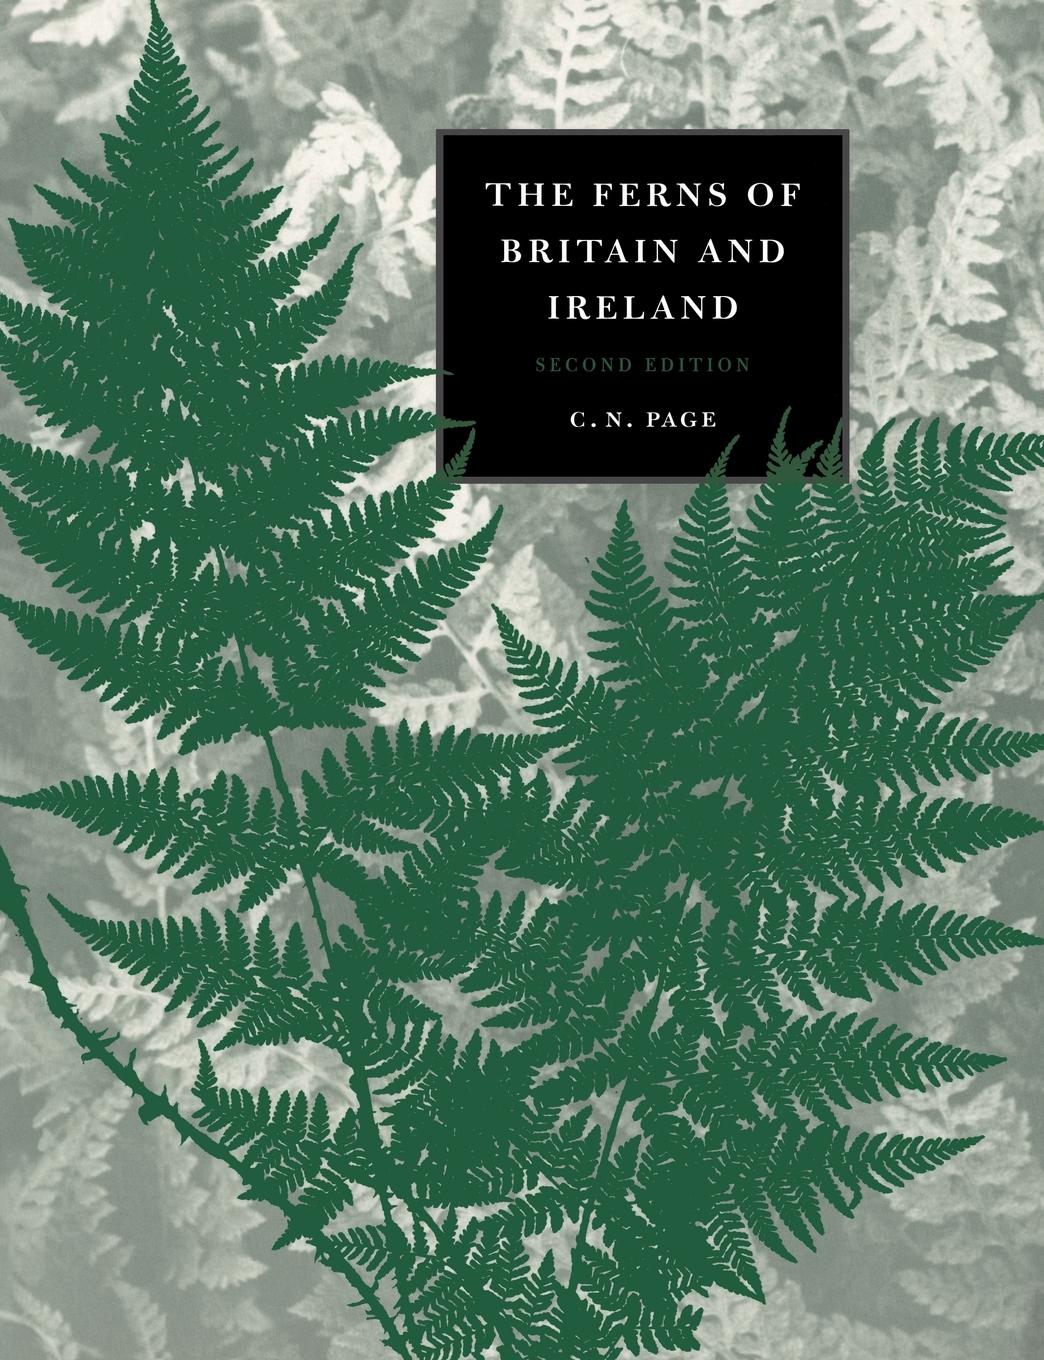 The Ferns of Britain and Ireland - Page, C. N. C. N., Page